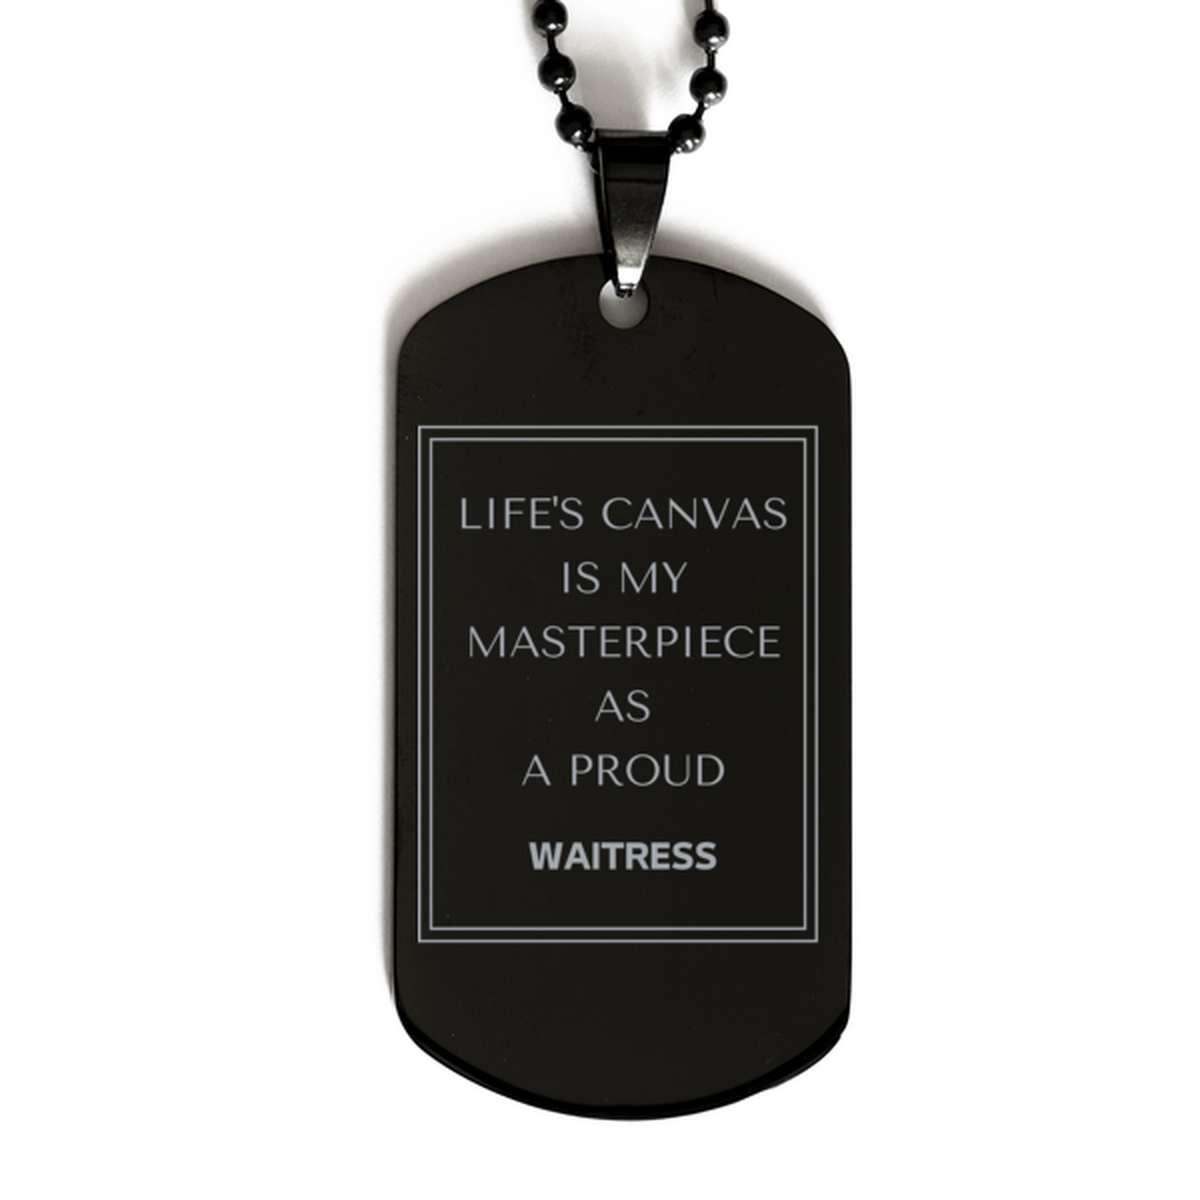 Proud Waitress Gifts, Life's canvas is my masterpiece, Epic Birthday Christmas Unique Black Dog Tag For Waitress, Coworkers, Men, Women, Friends